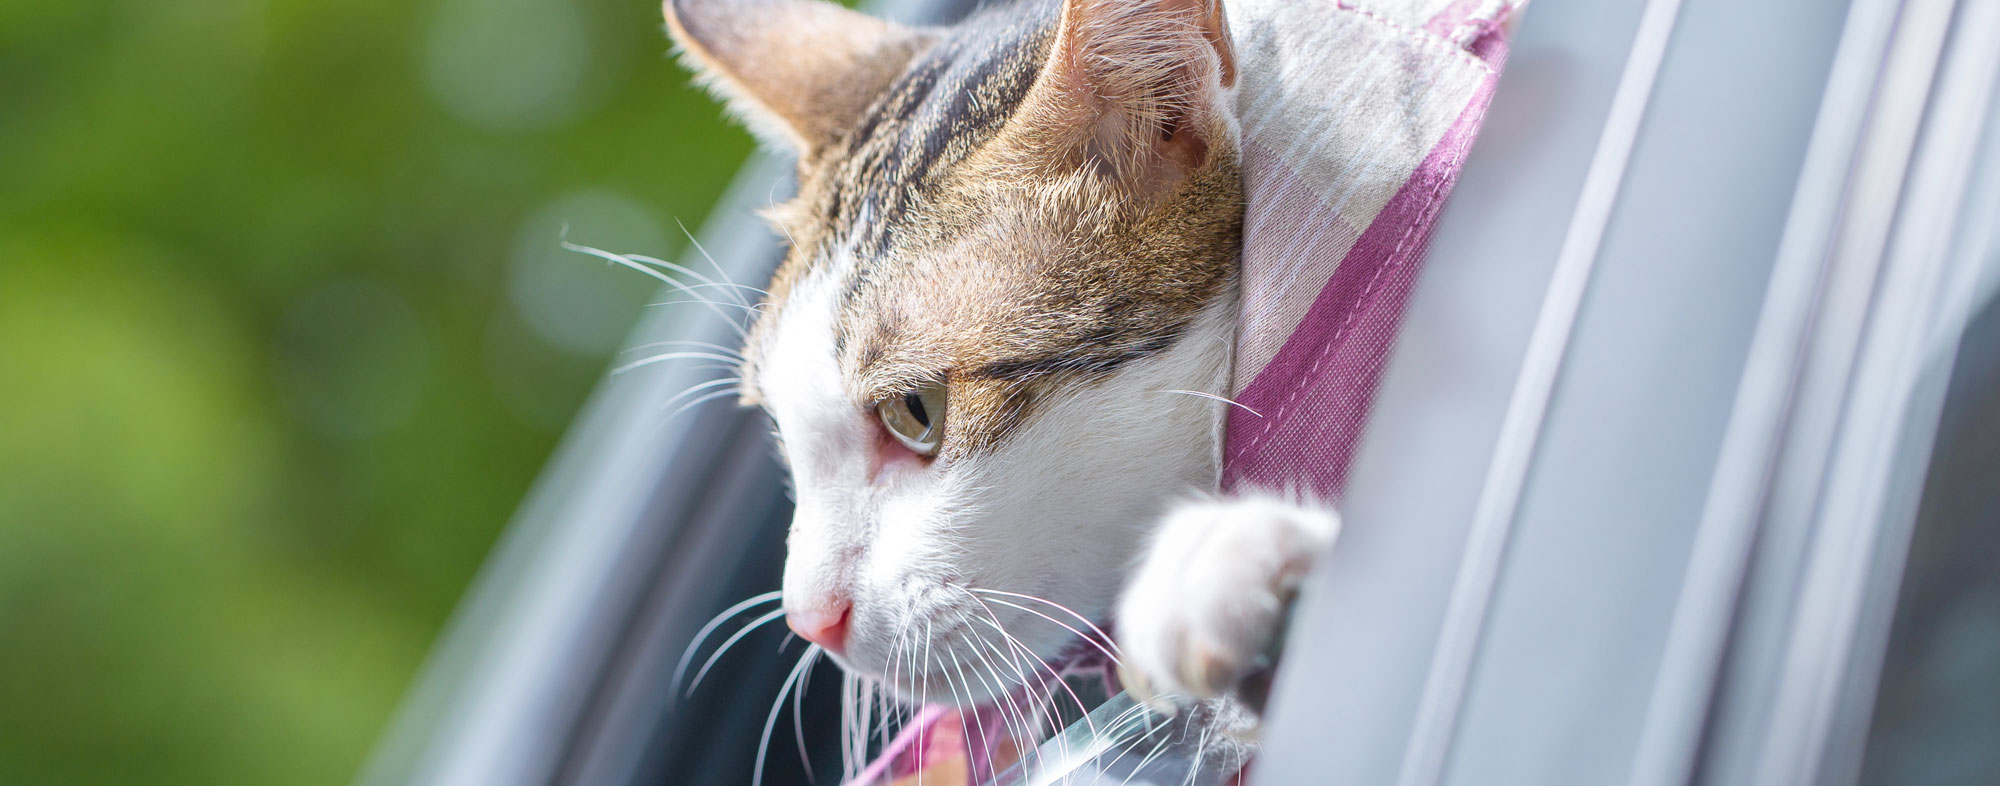 Although your cat may get anxious traveling, they'll adjust to it